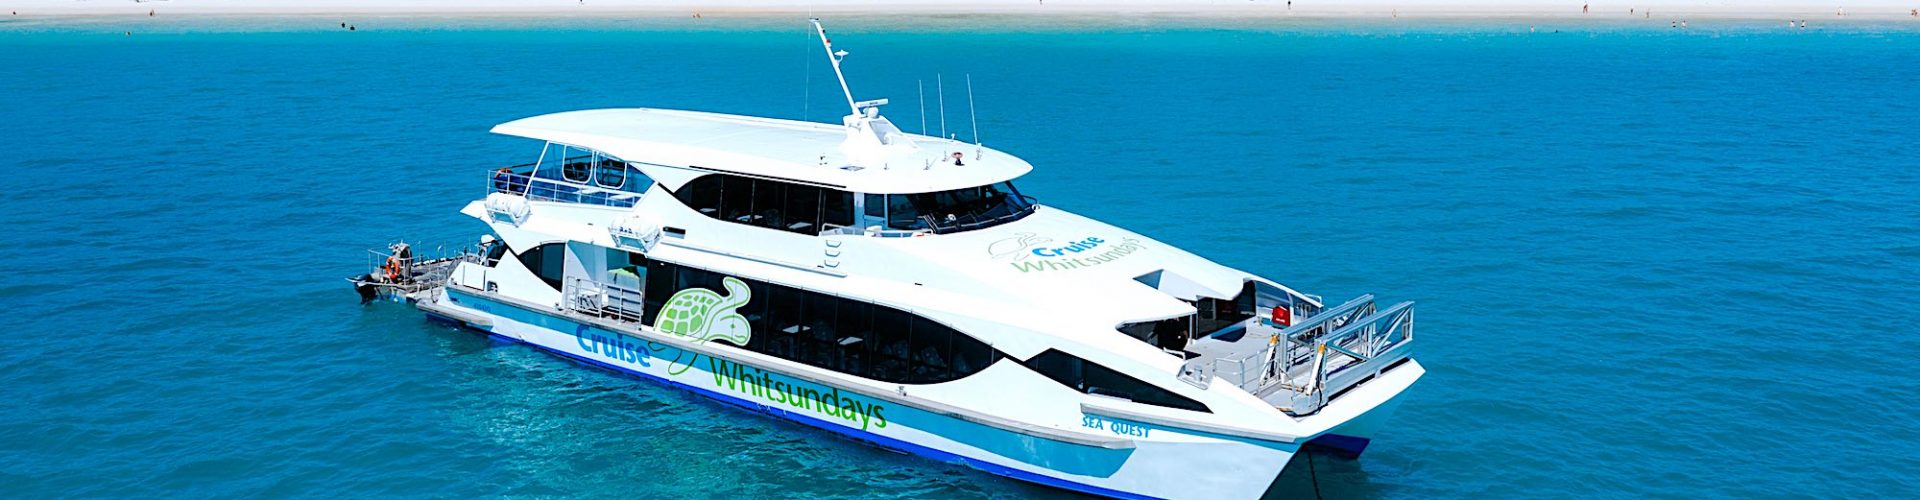 Review: Whitehaven Beach cruise from Airlie Beach and Hamilton Island is a picture perfect day out, QLD inner banner